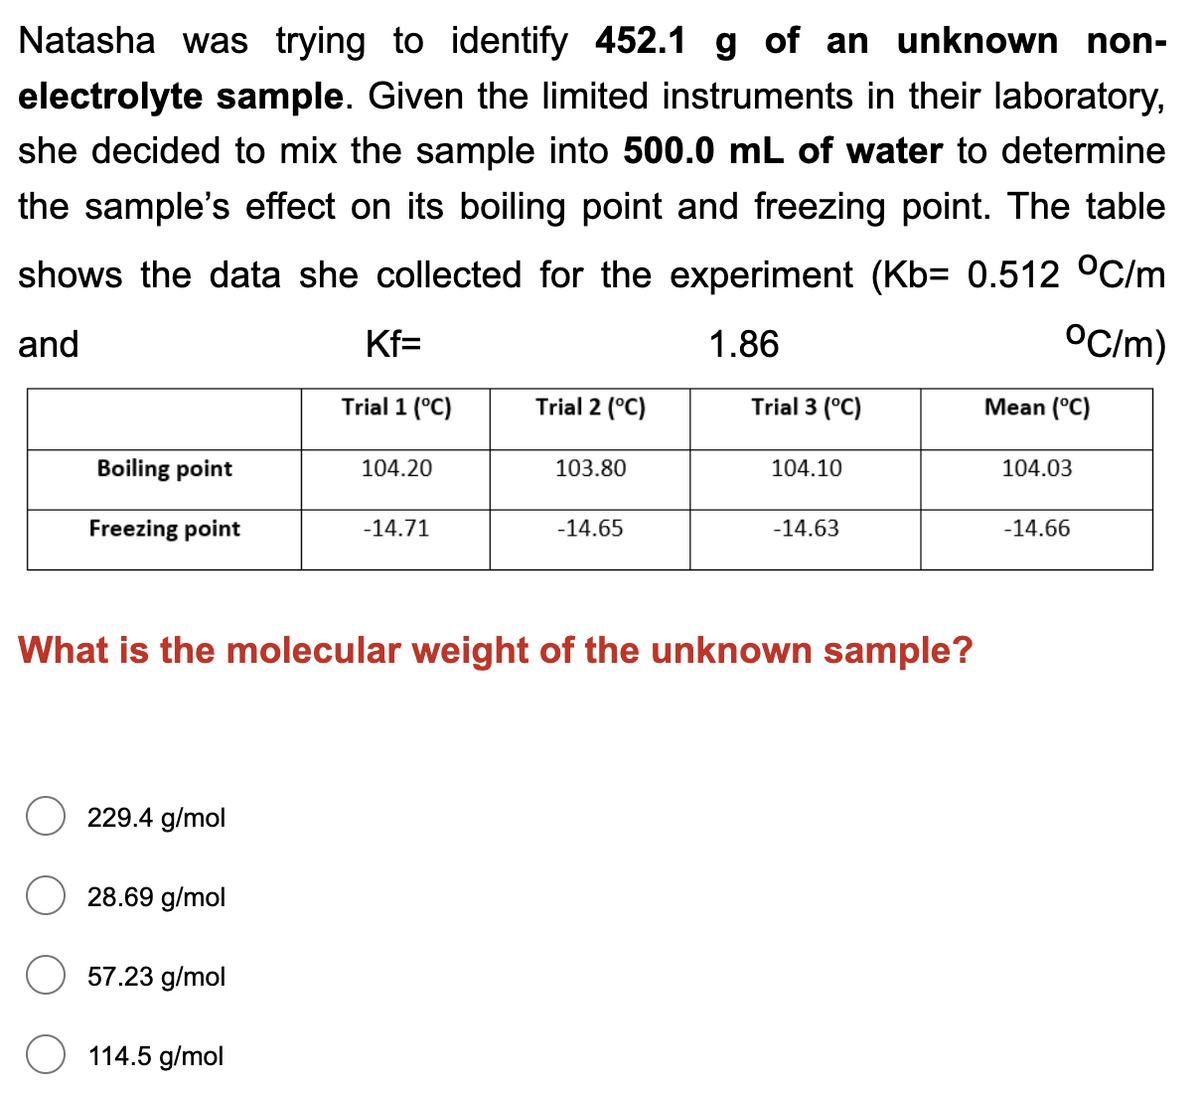 Natasha was trying to identify 452.1g of an unknown non-
electrolyte sample. Given the limited instruments in their laboratory,
she decided to mix the sample into 500.0 mL of water to determine
the sample's effect on its boiling point and freezing point. The table
shows the data she collected for the experiment (Kb= 0.512 °C/m
and
Kf=
1.86
OC/m)
Trial 1 (°C)
Trial 2 (°C)
Trial 3 (°C)
Mean (°C)
Boiling point
104.20
103.80
104.10
104.03
Freezing point
-14.71
-14.65
-14.63
-14.66
What is the molecular weight of the unknown sample?
229.4 g/mol
28.69 g/mol
57.23 g/mol
O 114.5 g/mol
